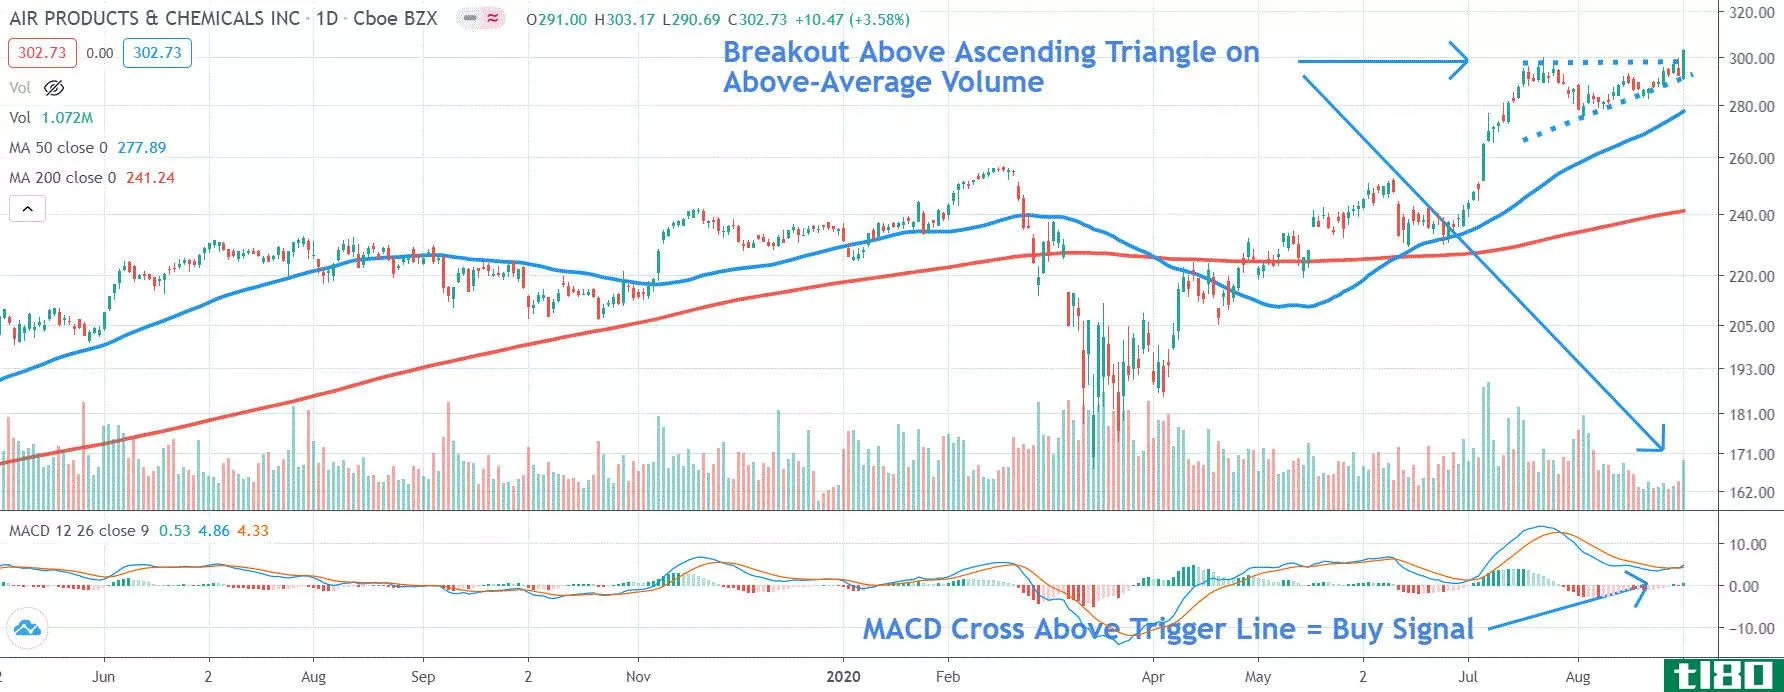 Chart depicting the share price of Air Products and Chemicals, Inc. (APD)